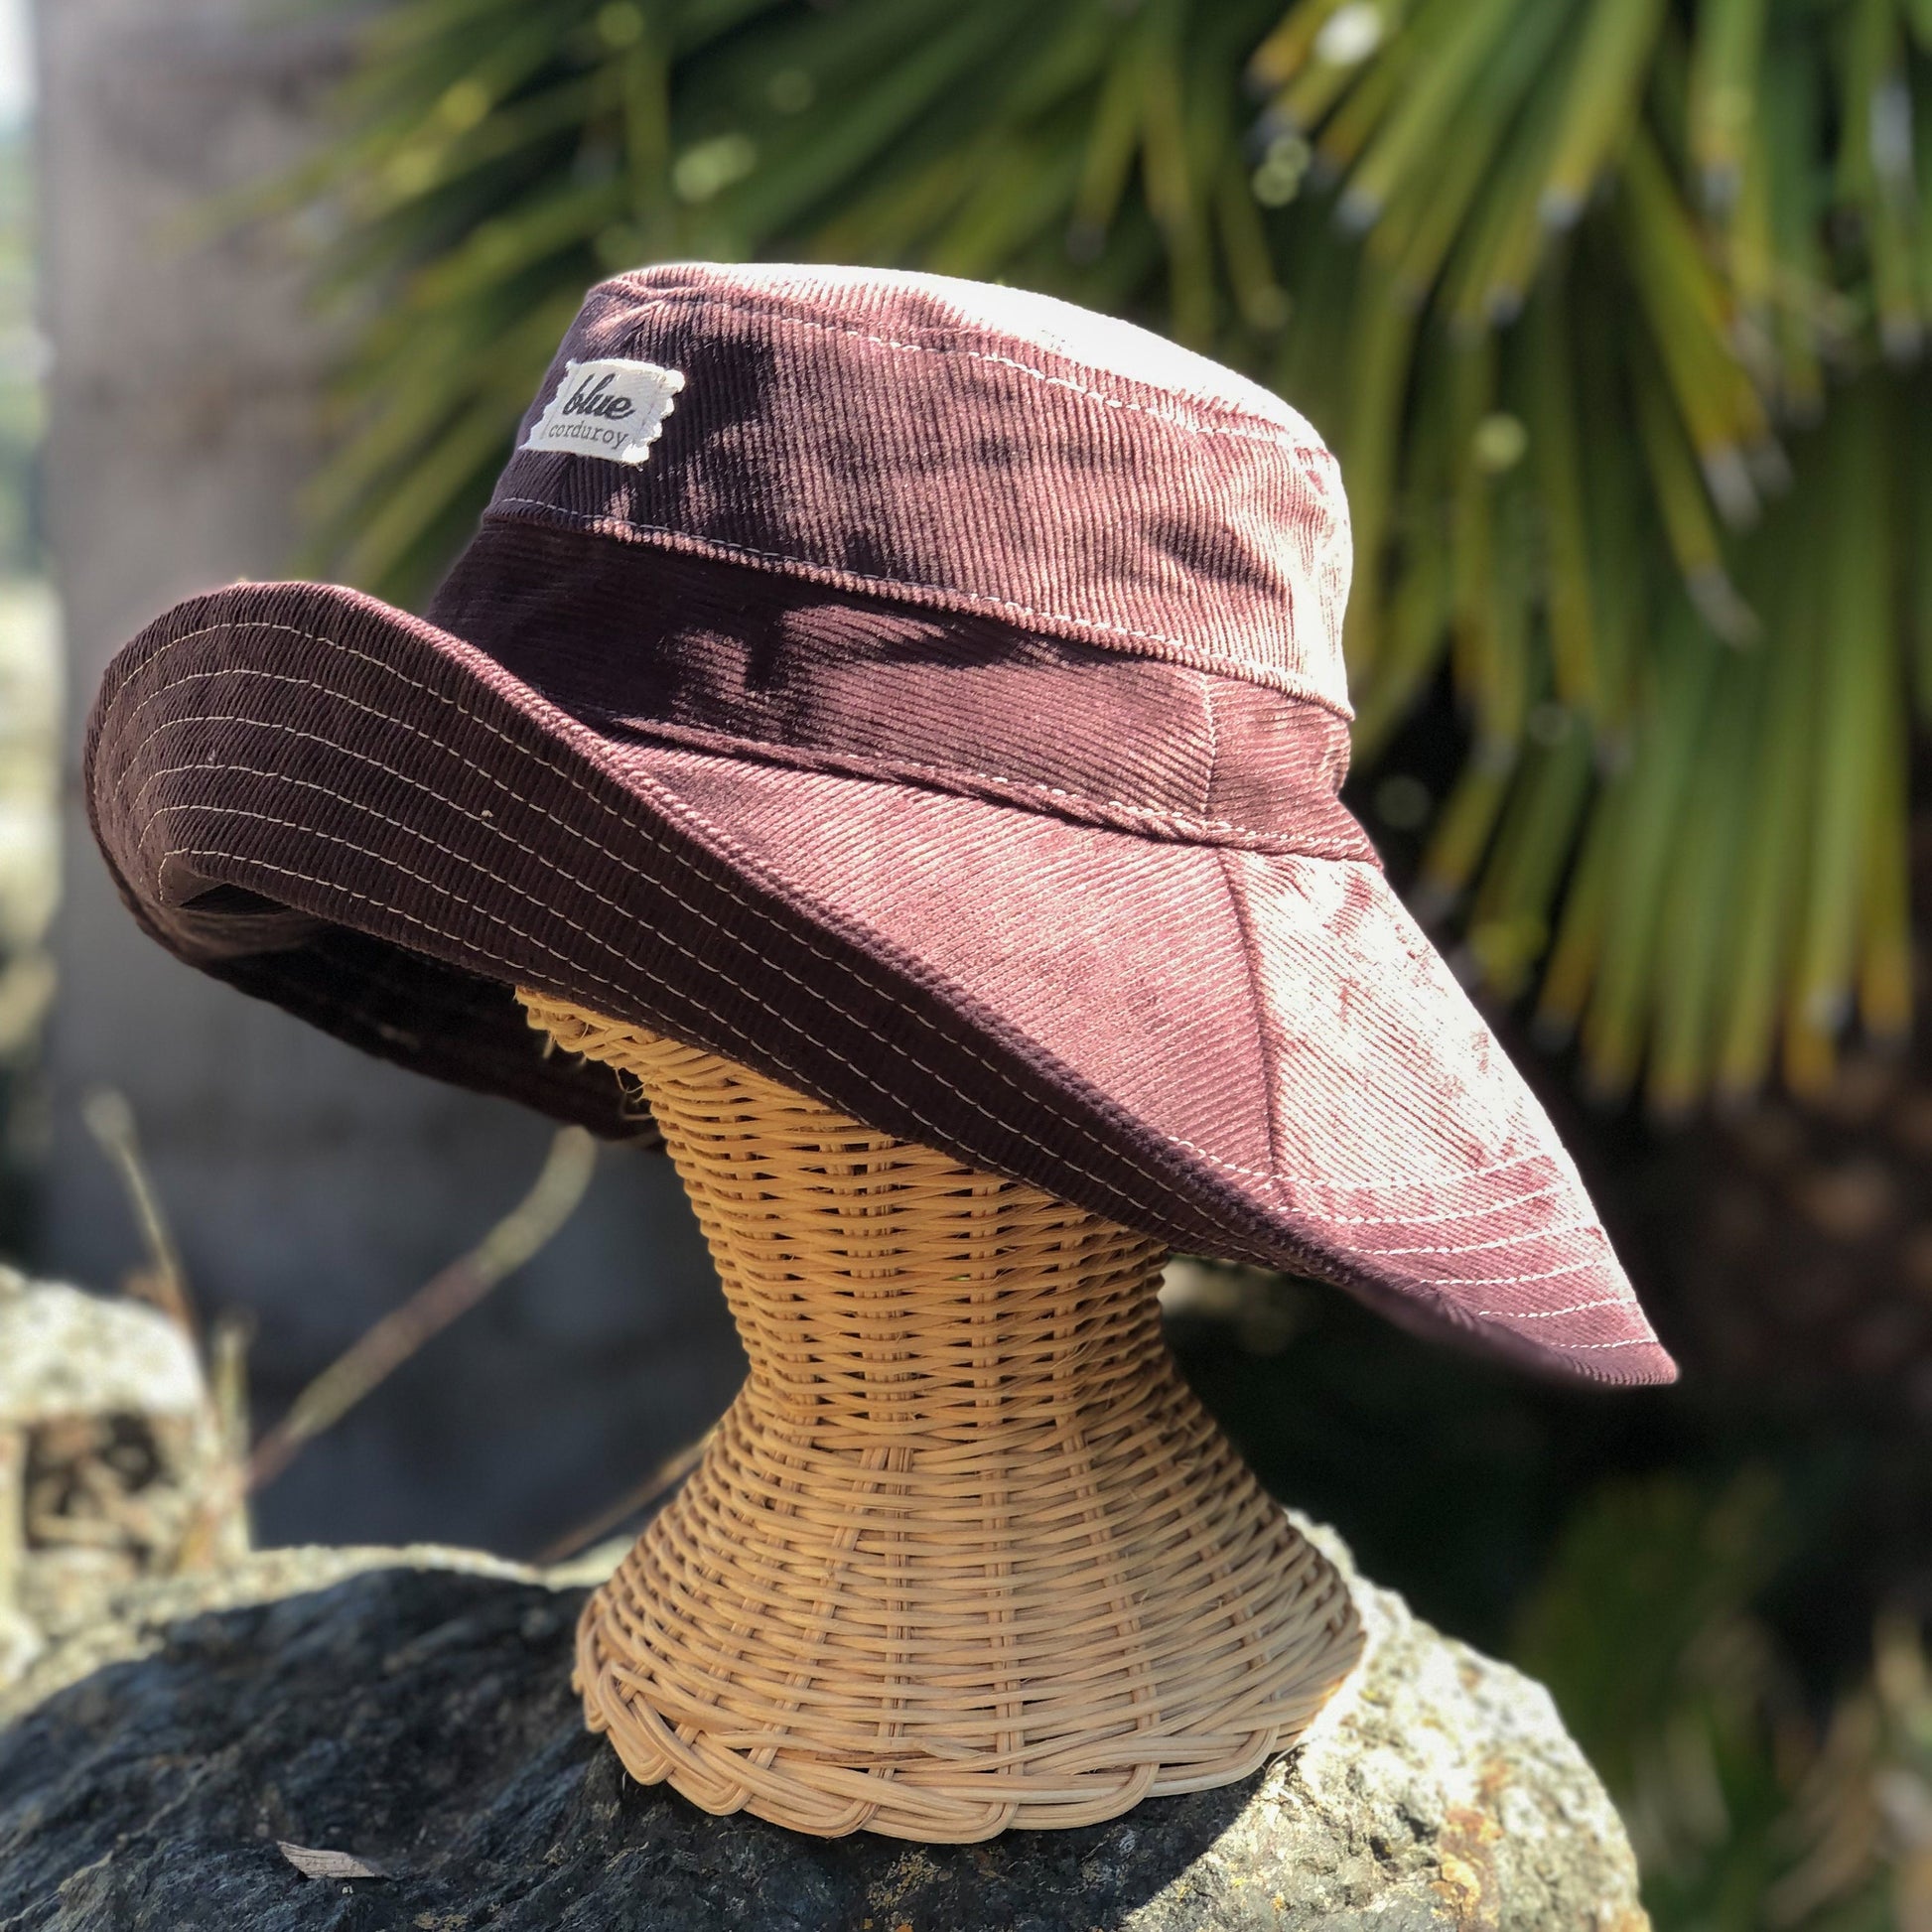 Wide Brim Hat for Women, Corduroy Bucket Hat, Foldable Beach Hat, Fall Accessories for Her, Winter Sun Hat, Cotton Cloth Sun Hat, brown hat